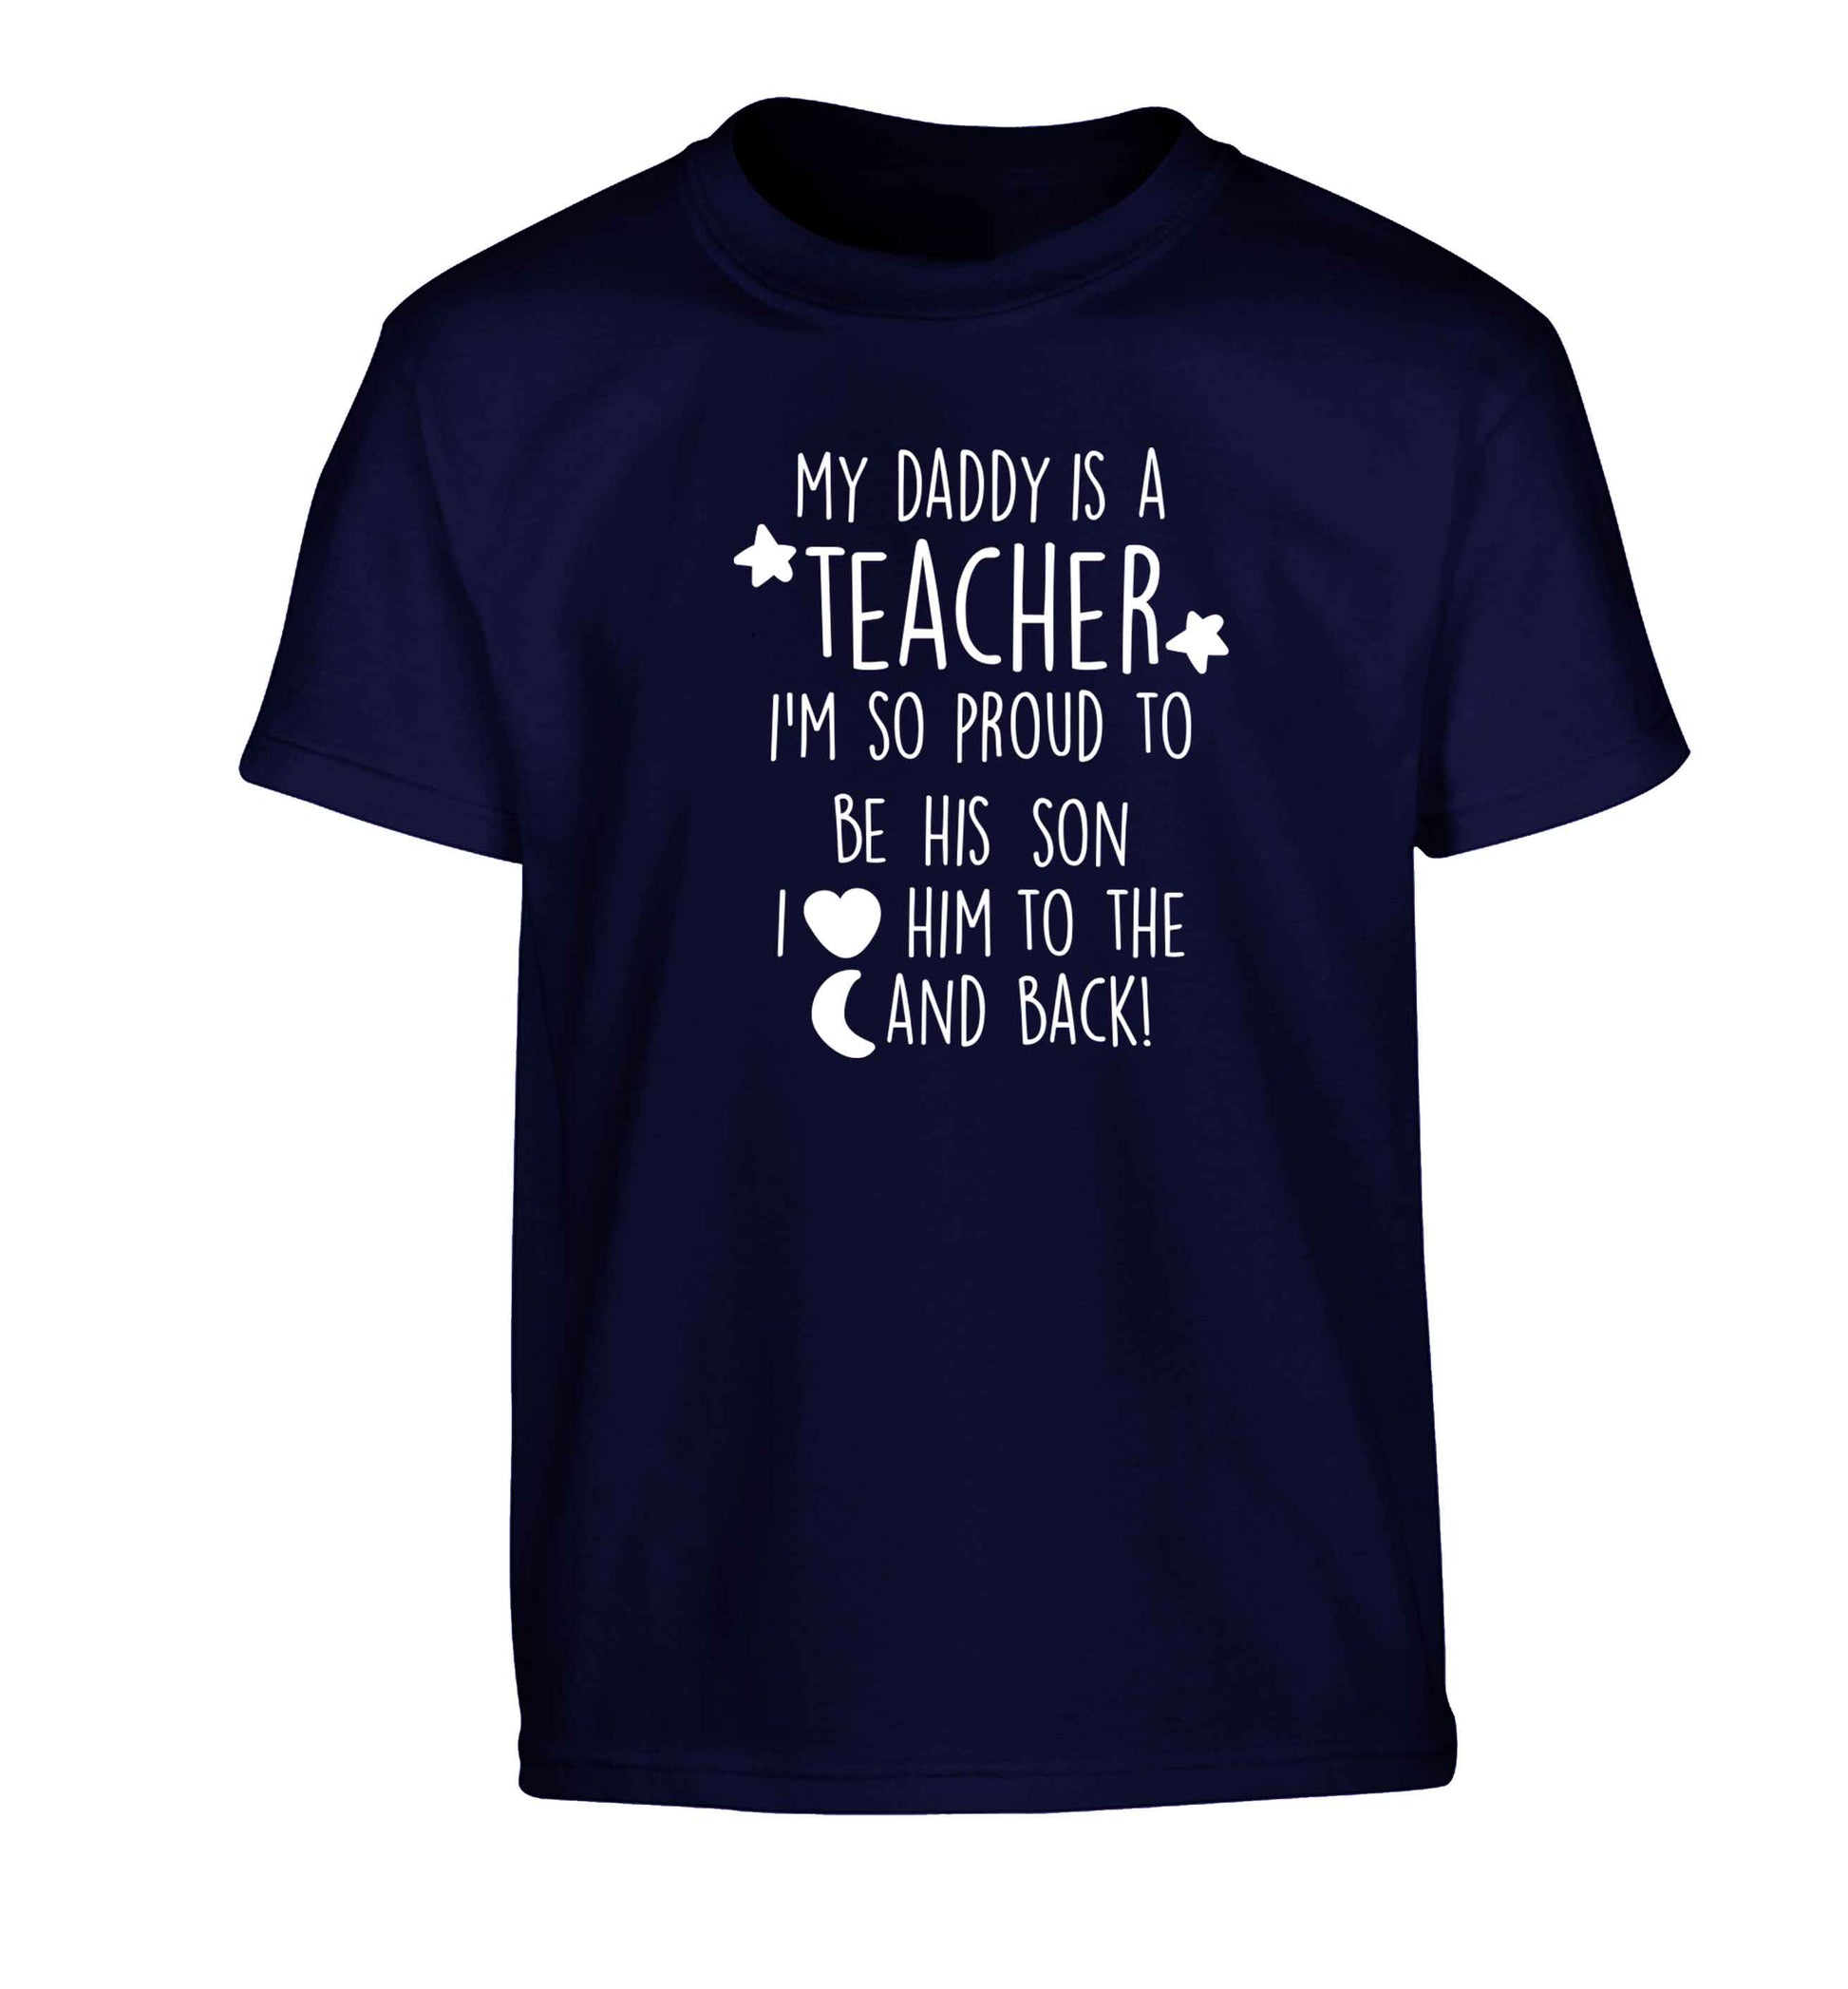 My daddy is a teacher I'm so proud to be his son I love her to the moon and back Children's navy Tshirt 12-13 Years